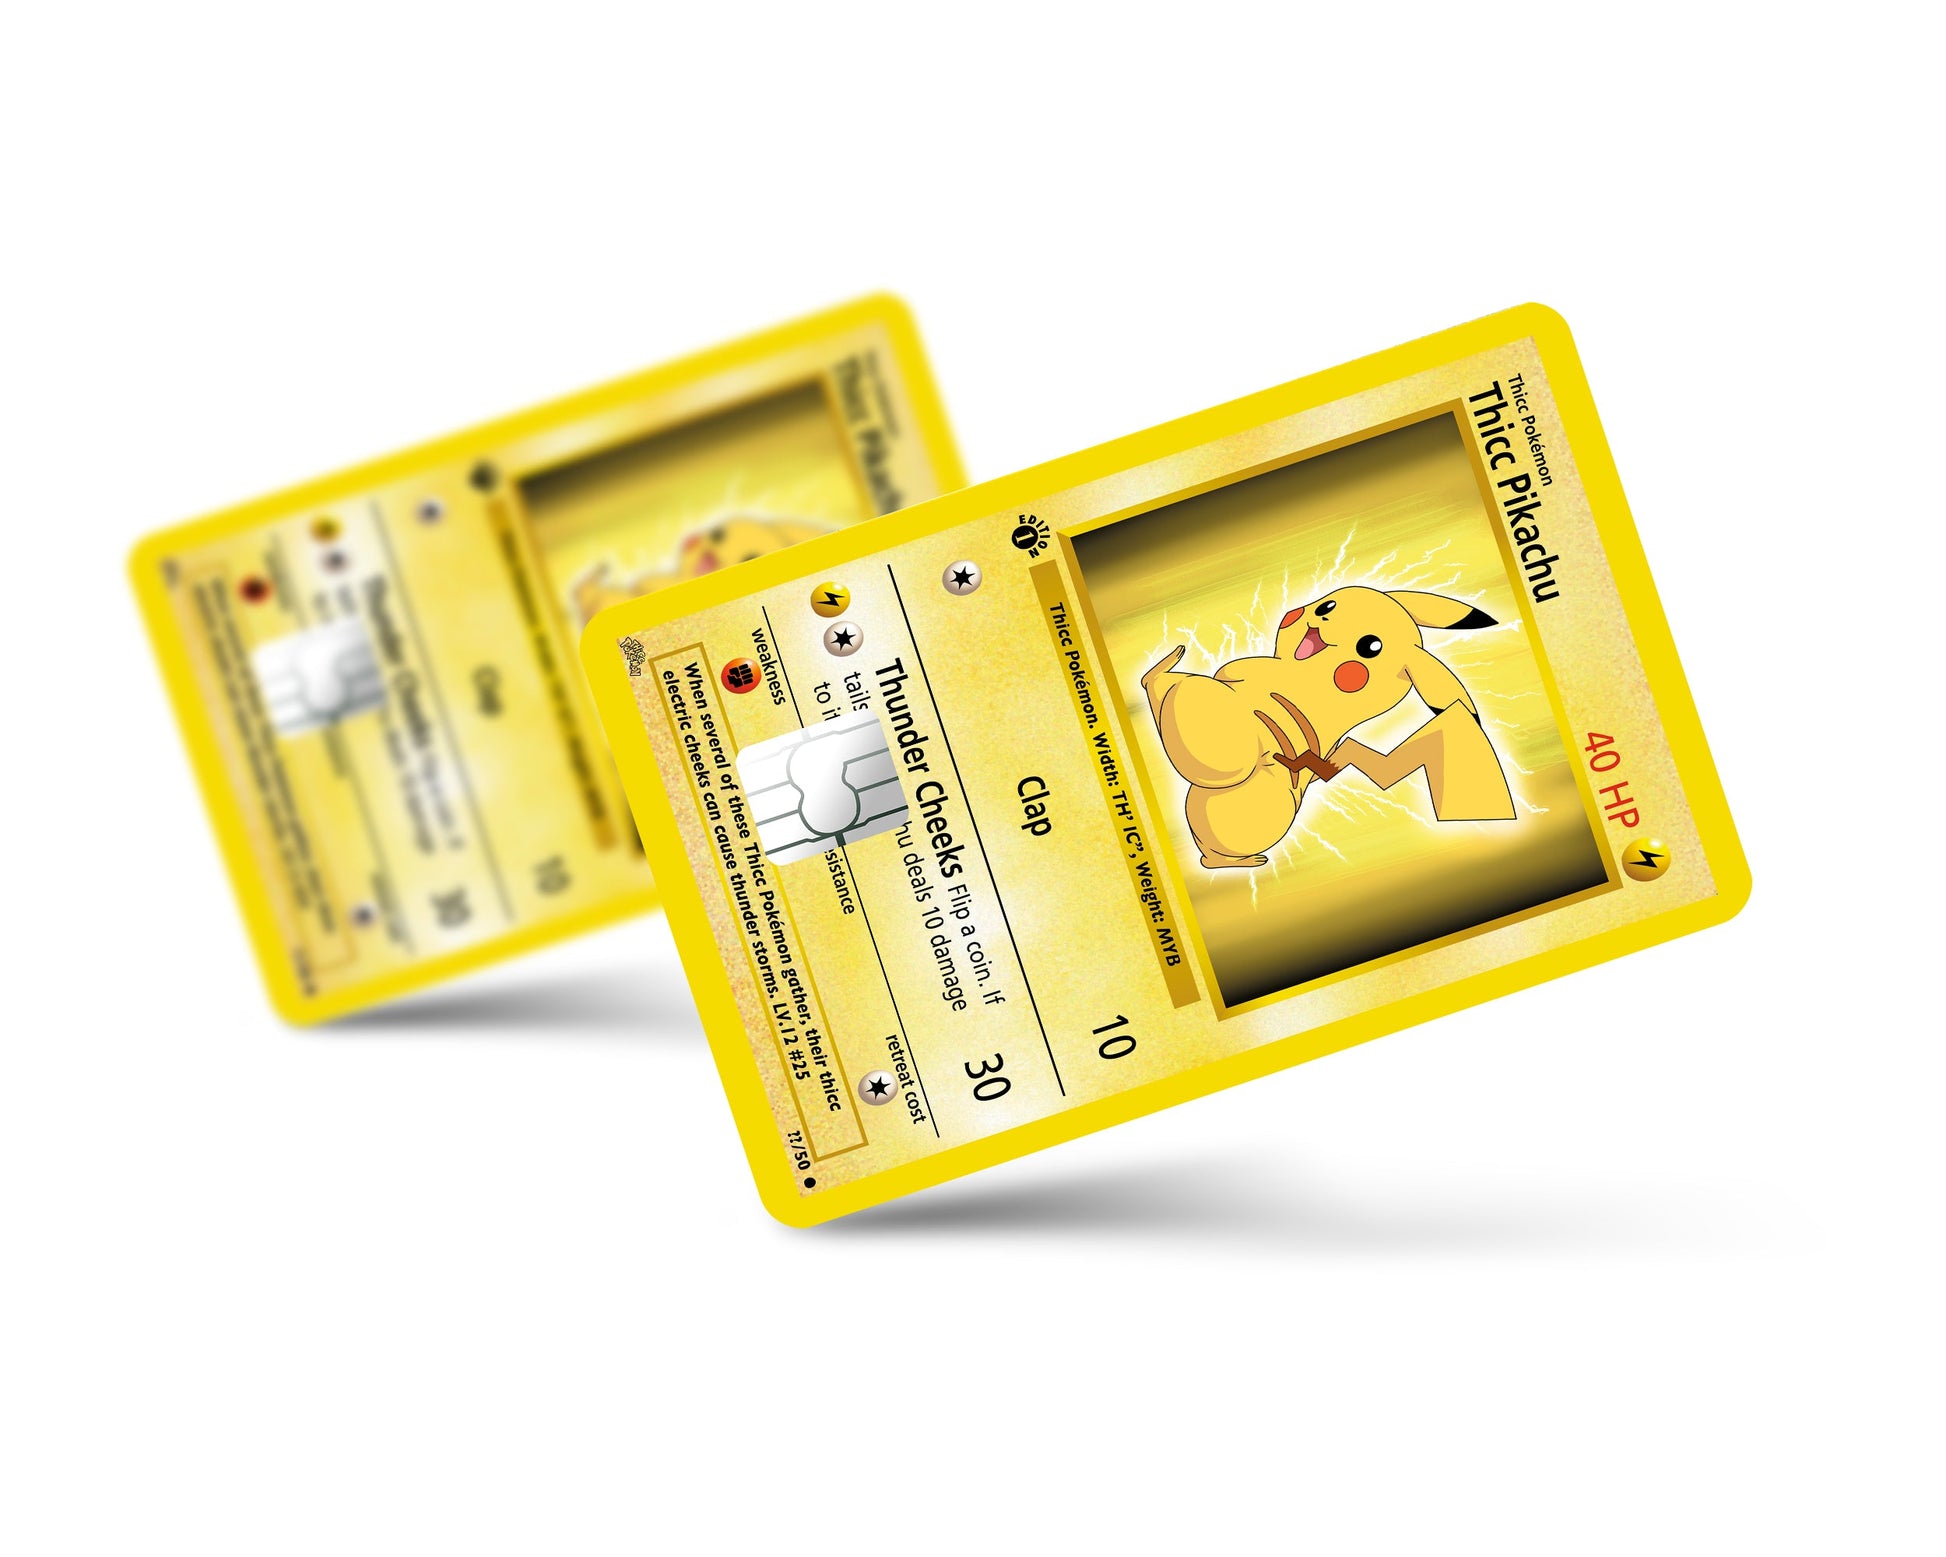 Anime Town Creations Credit Card Thicc Pikachu Pokemon Card Full Skins - Anime Pokemon Credit Card Skin